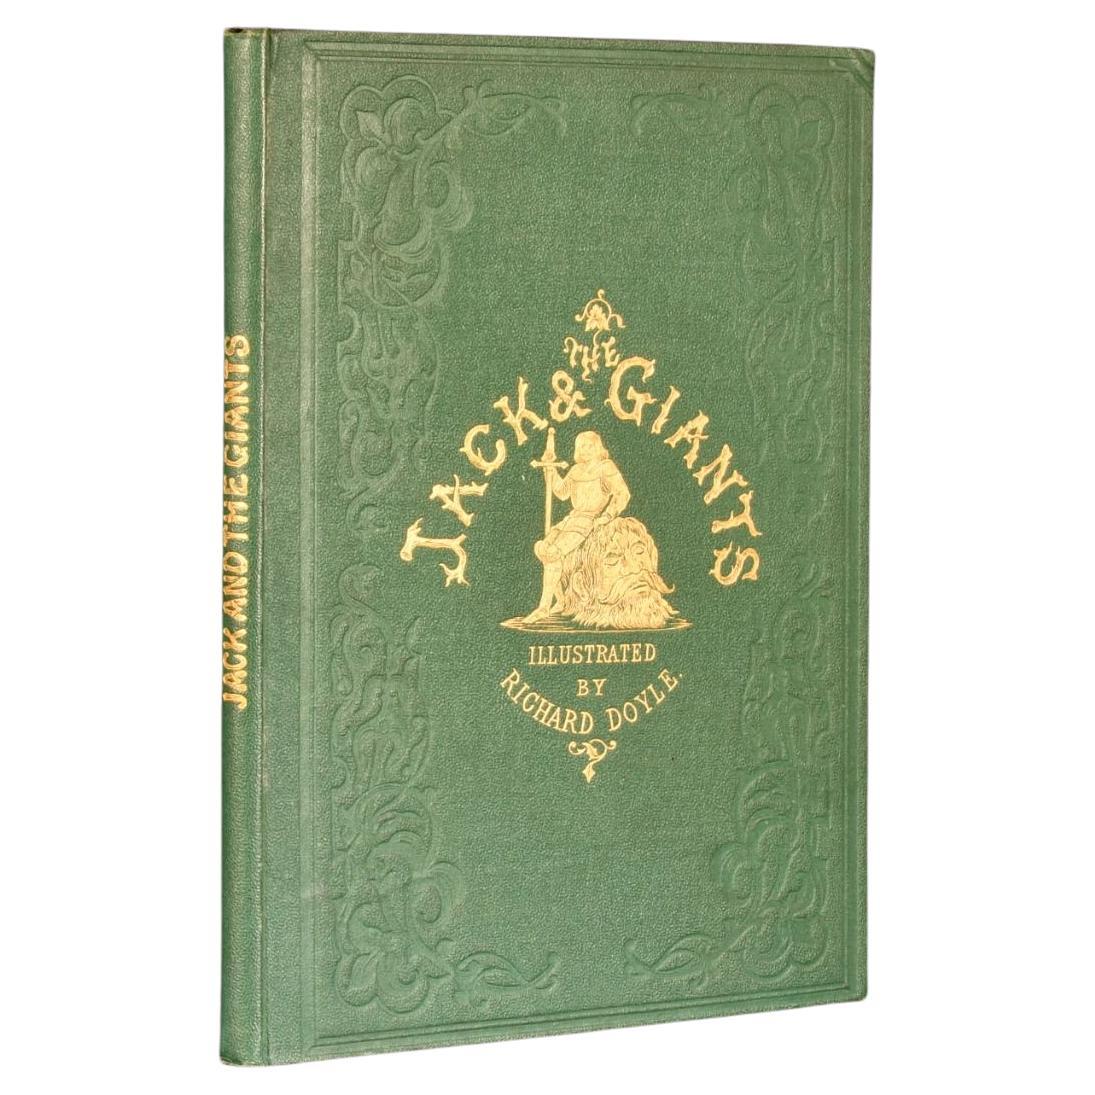 1858 The Story of Jack and the Giants For Sale